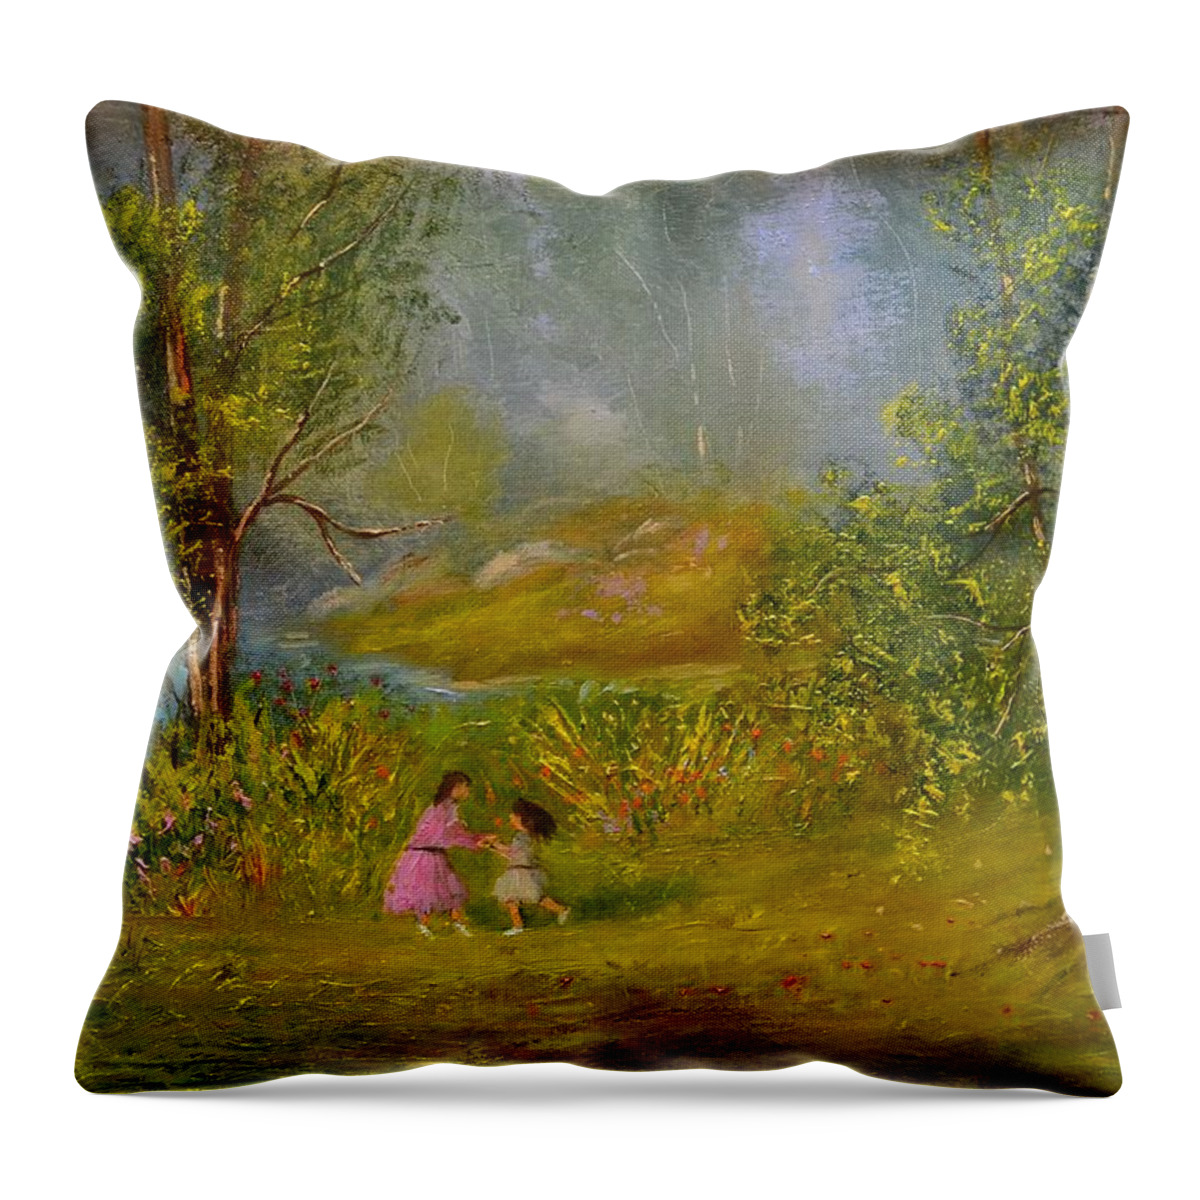 Water Throw Pillow featuring the painting Mother and Daughter by Michael Mrozik